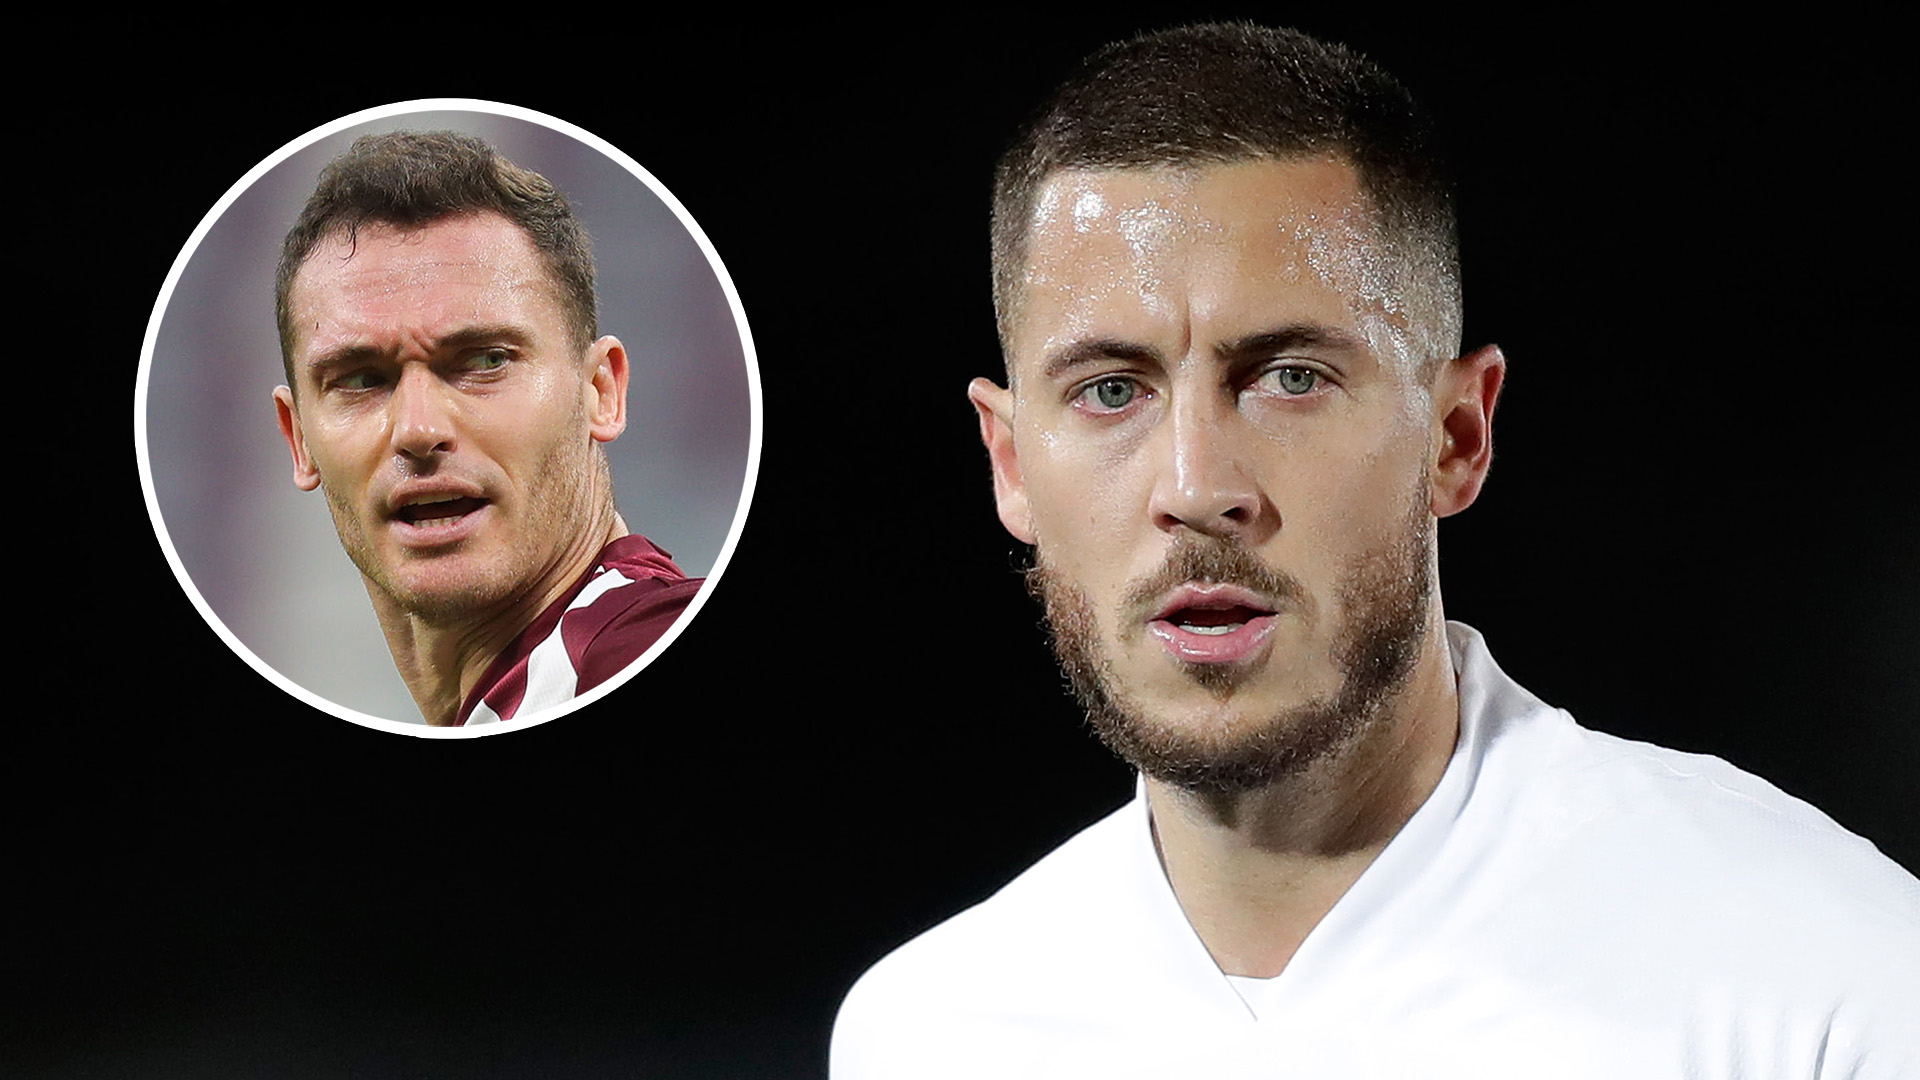 'It's not his fault!' - Vermaelen defends Hazard amid injury struggles & claims he will get back to his best